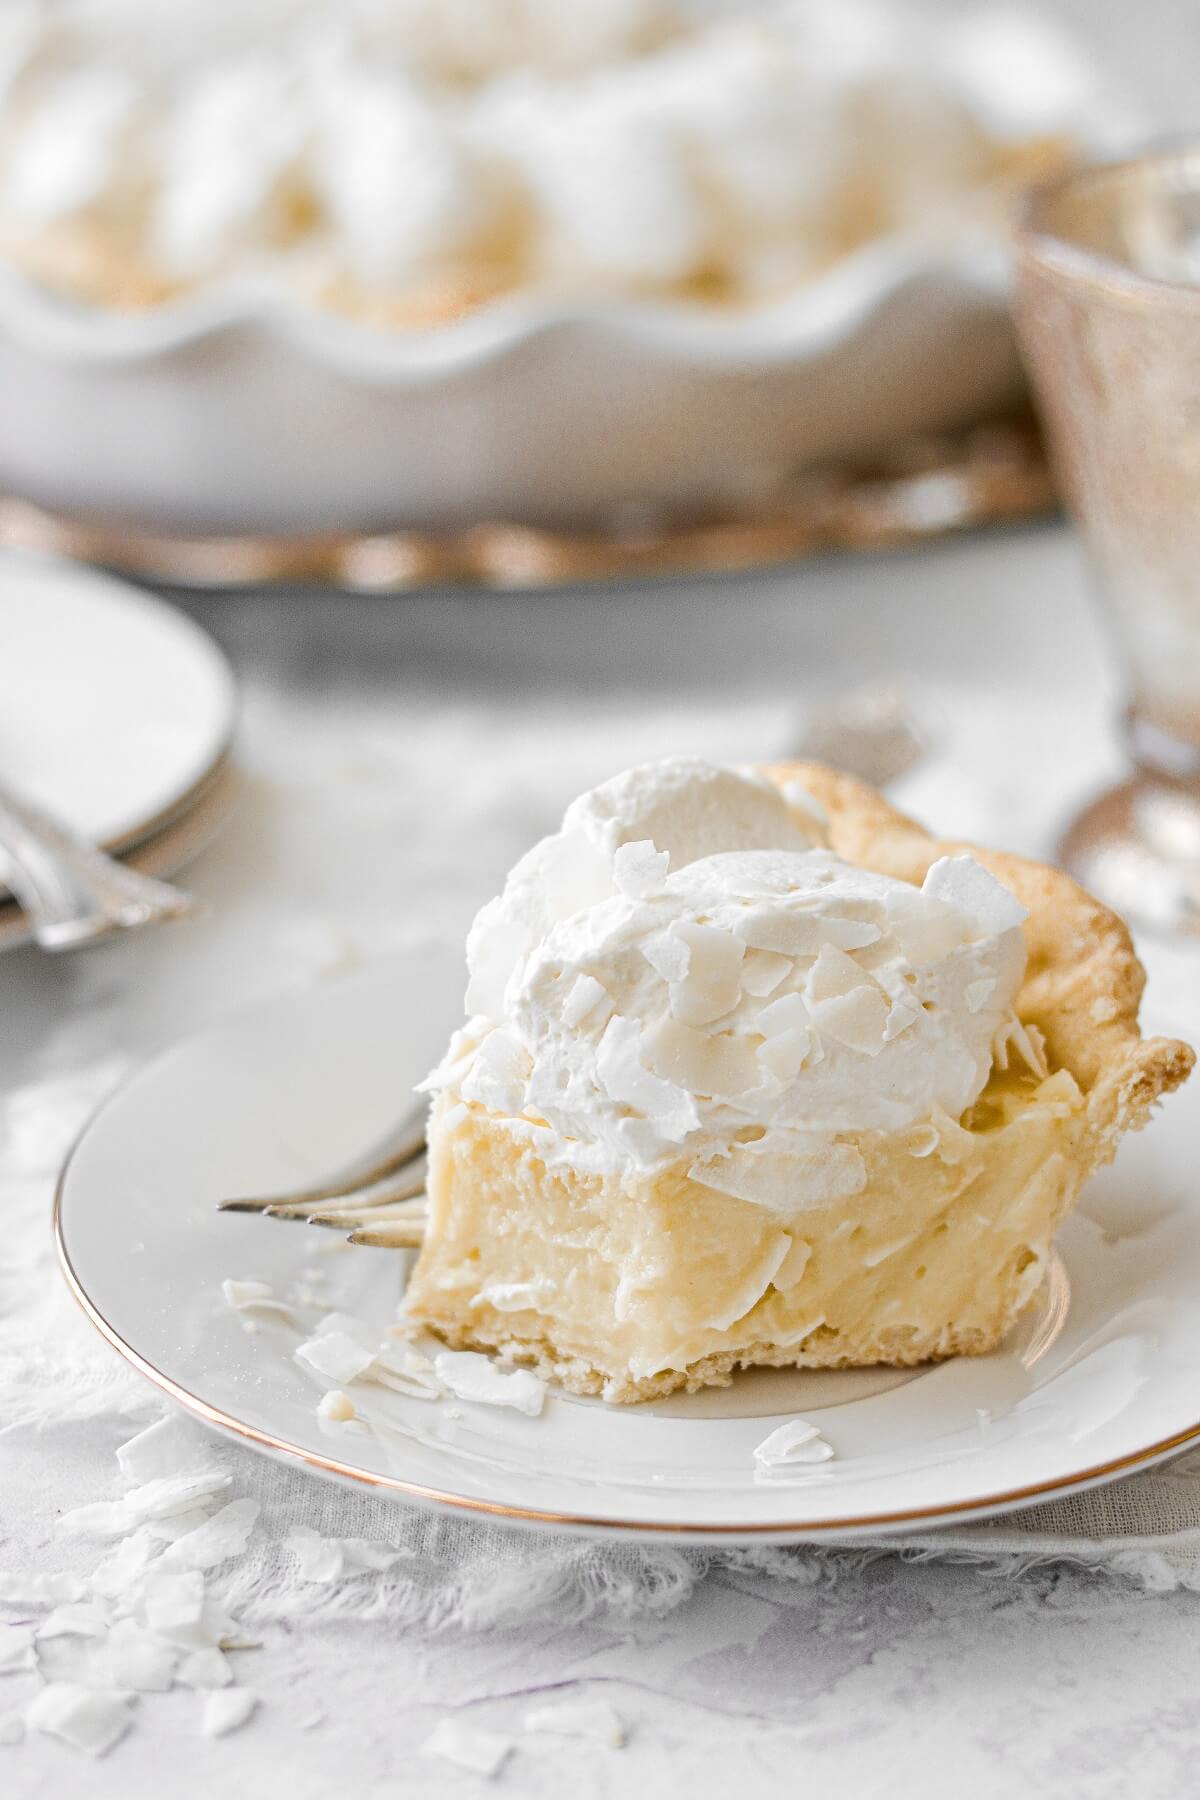 A slice of coconut cream pie with a bite taken.